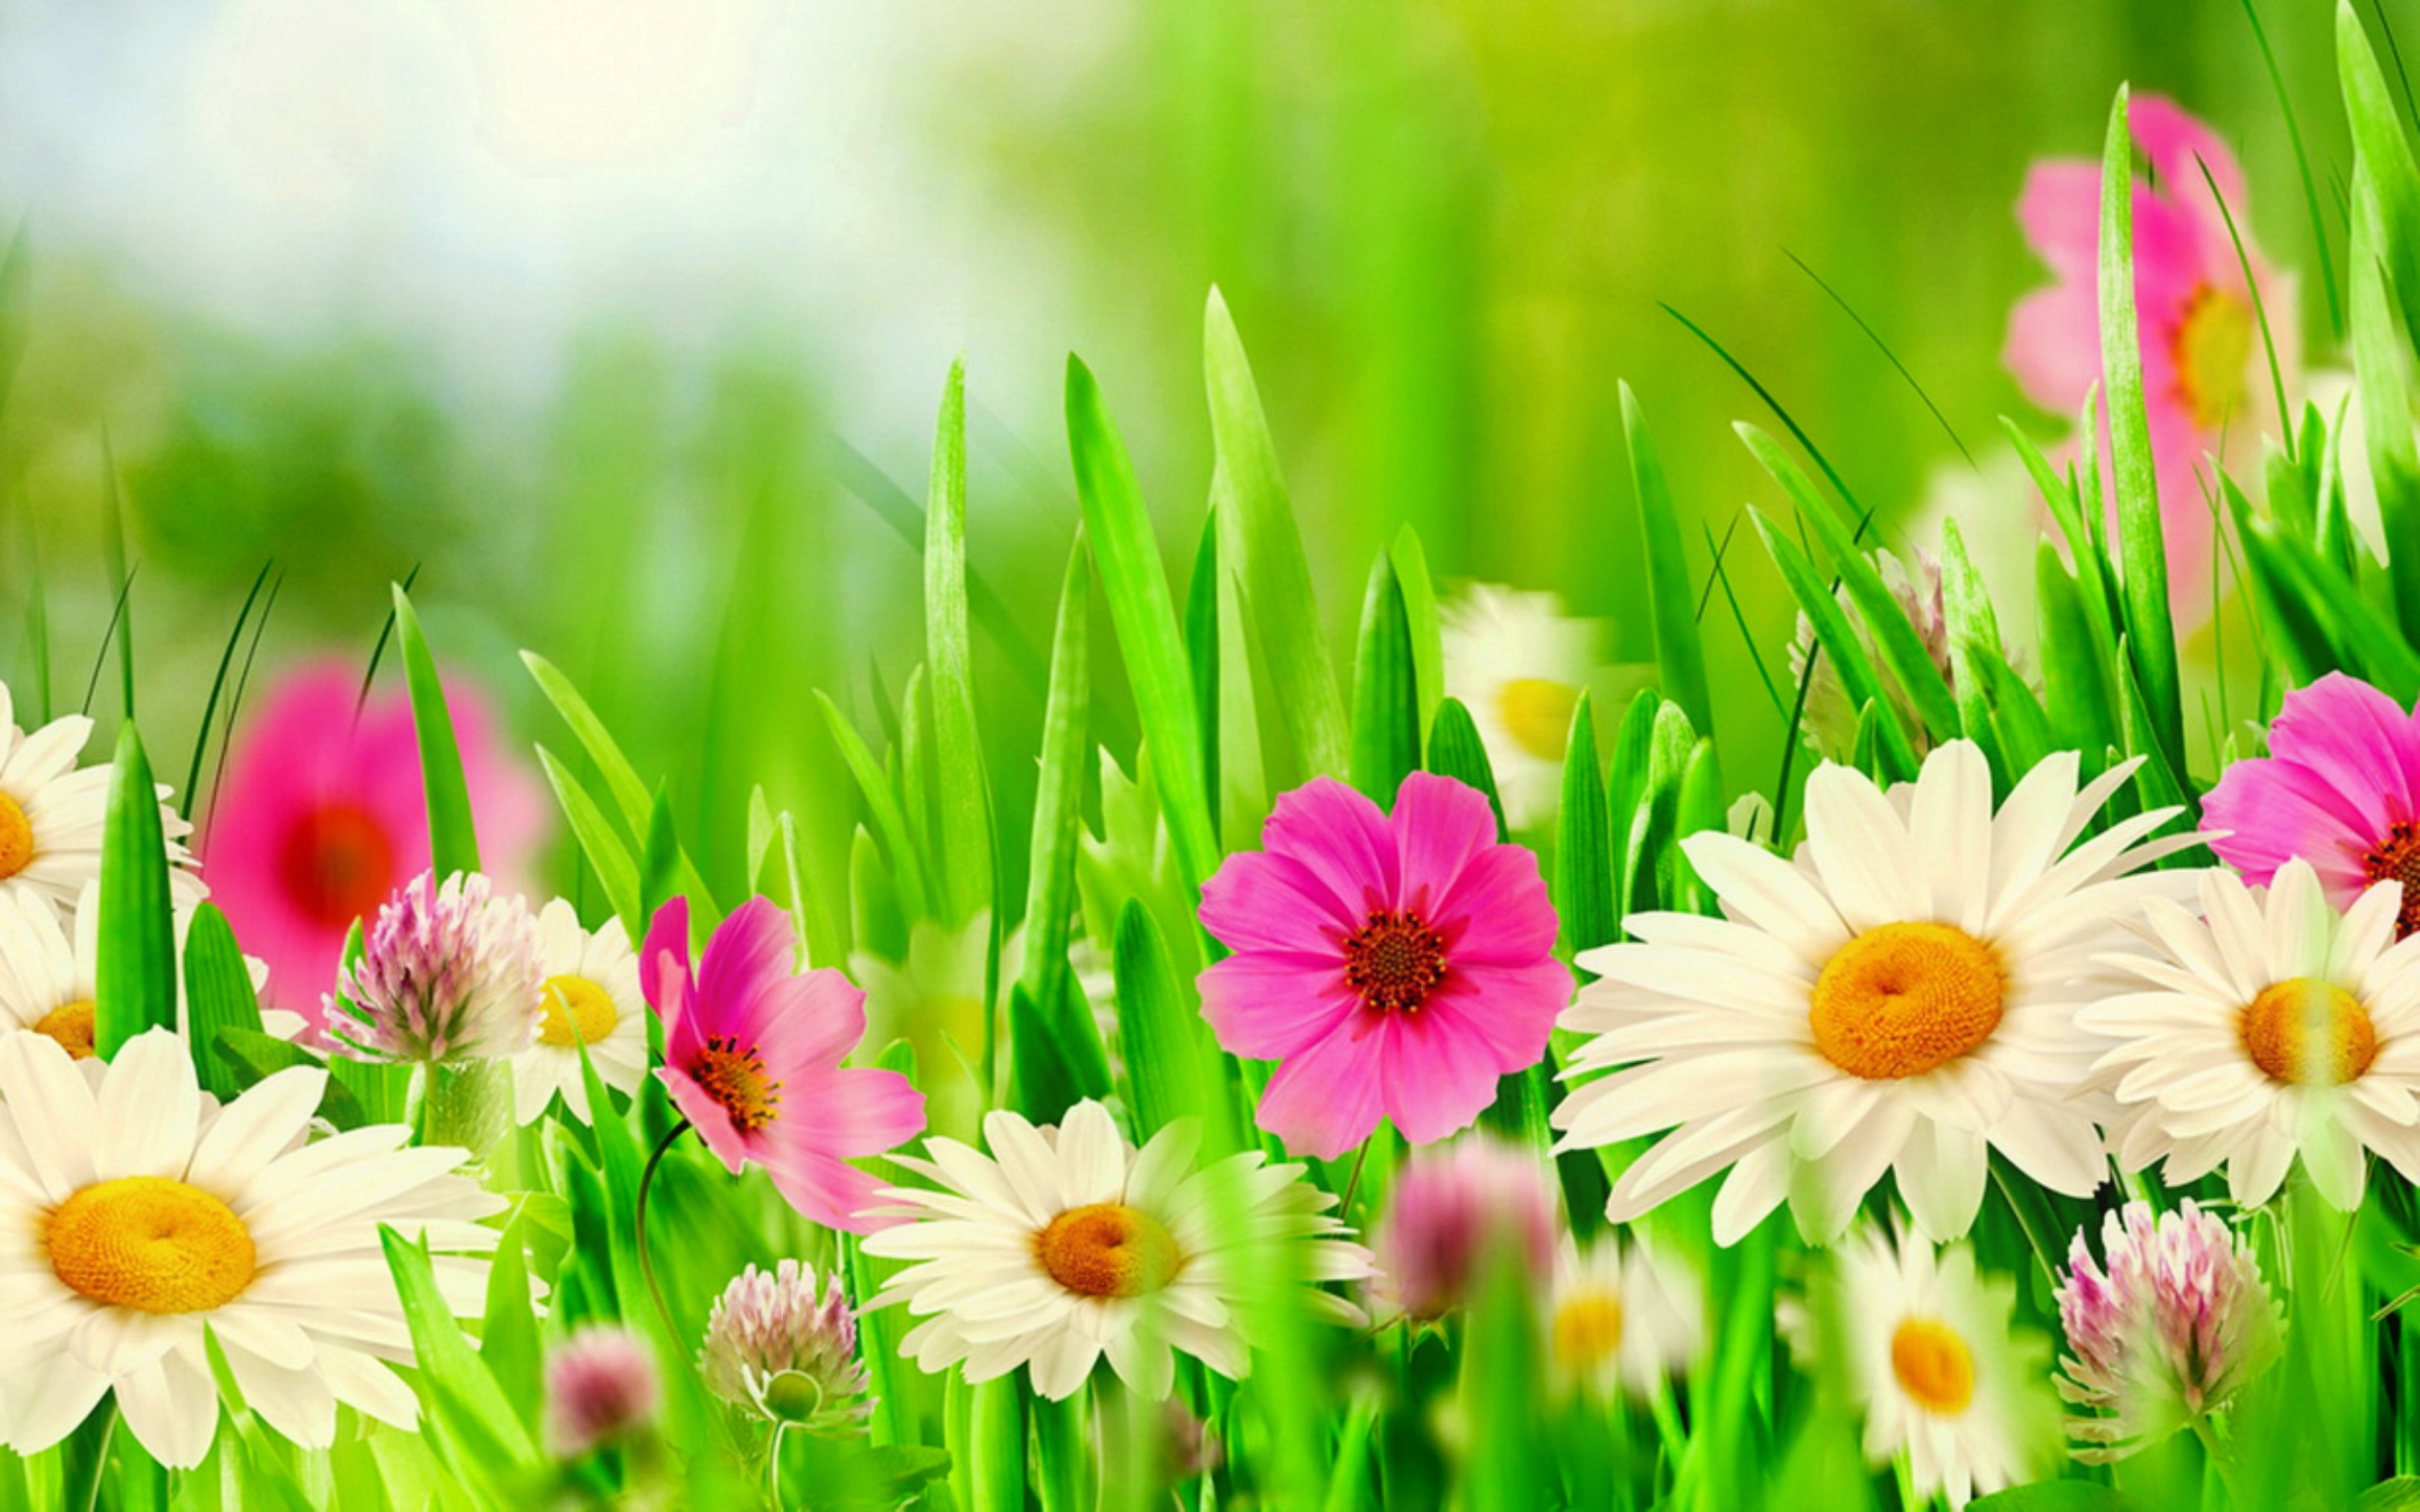 Spring freshness | HD Wallpapers